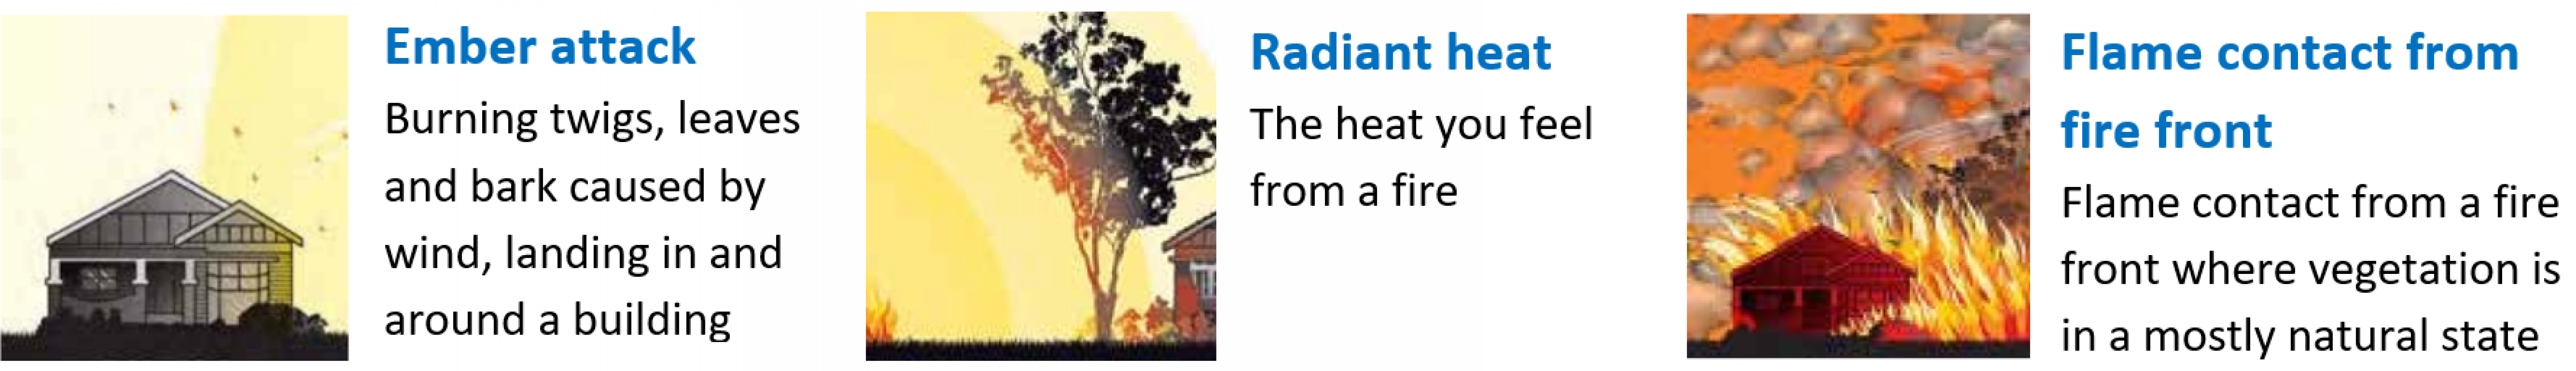 The image outlines the types of bushfire attacks.Ember attack:burning twigs, leaves and bark caused by wind, landing in and around a building. Radiant heat: the heat you feel from a fire. Flame contact from fire front: flame contact from a fire front where vegetation is in mostly natural state. 